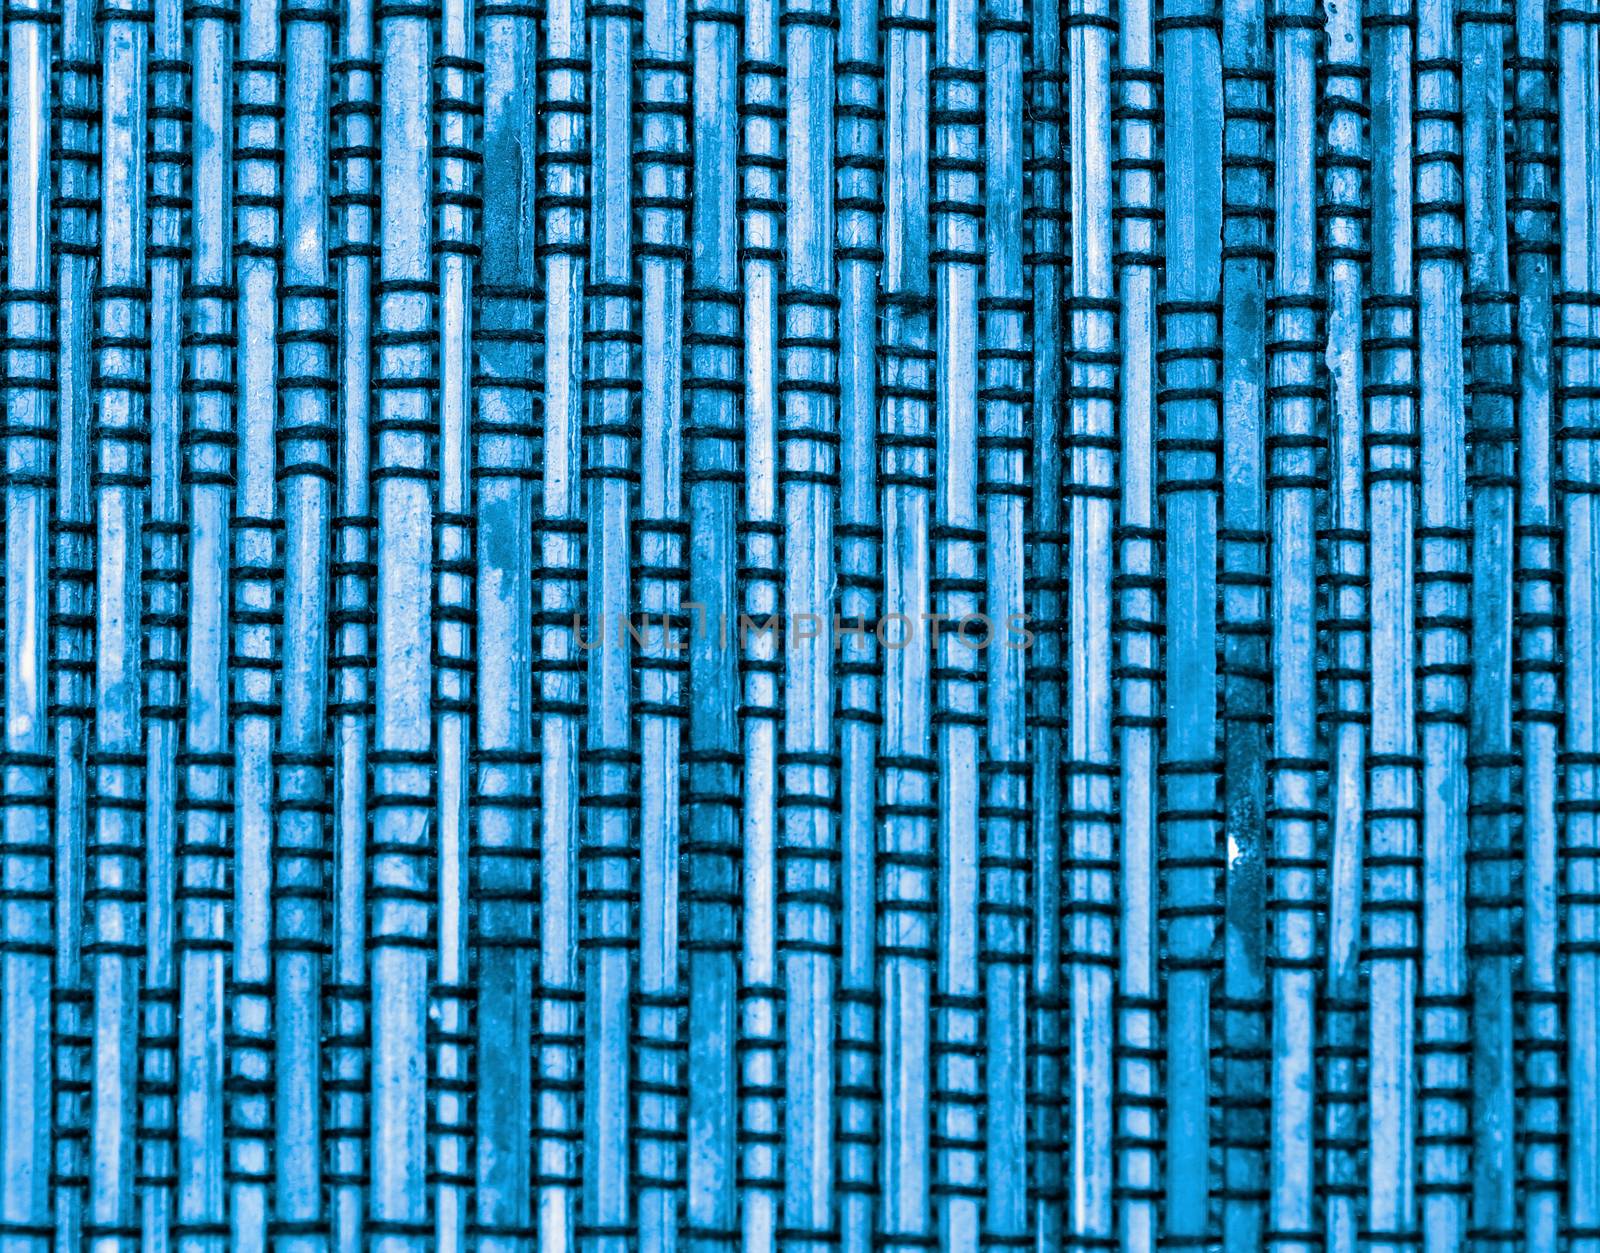 Background of Blue Bamboo Straw Mat with Black Threads closeup